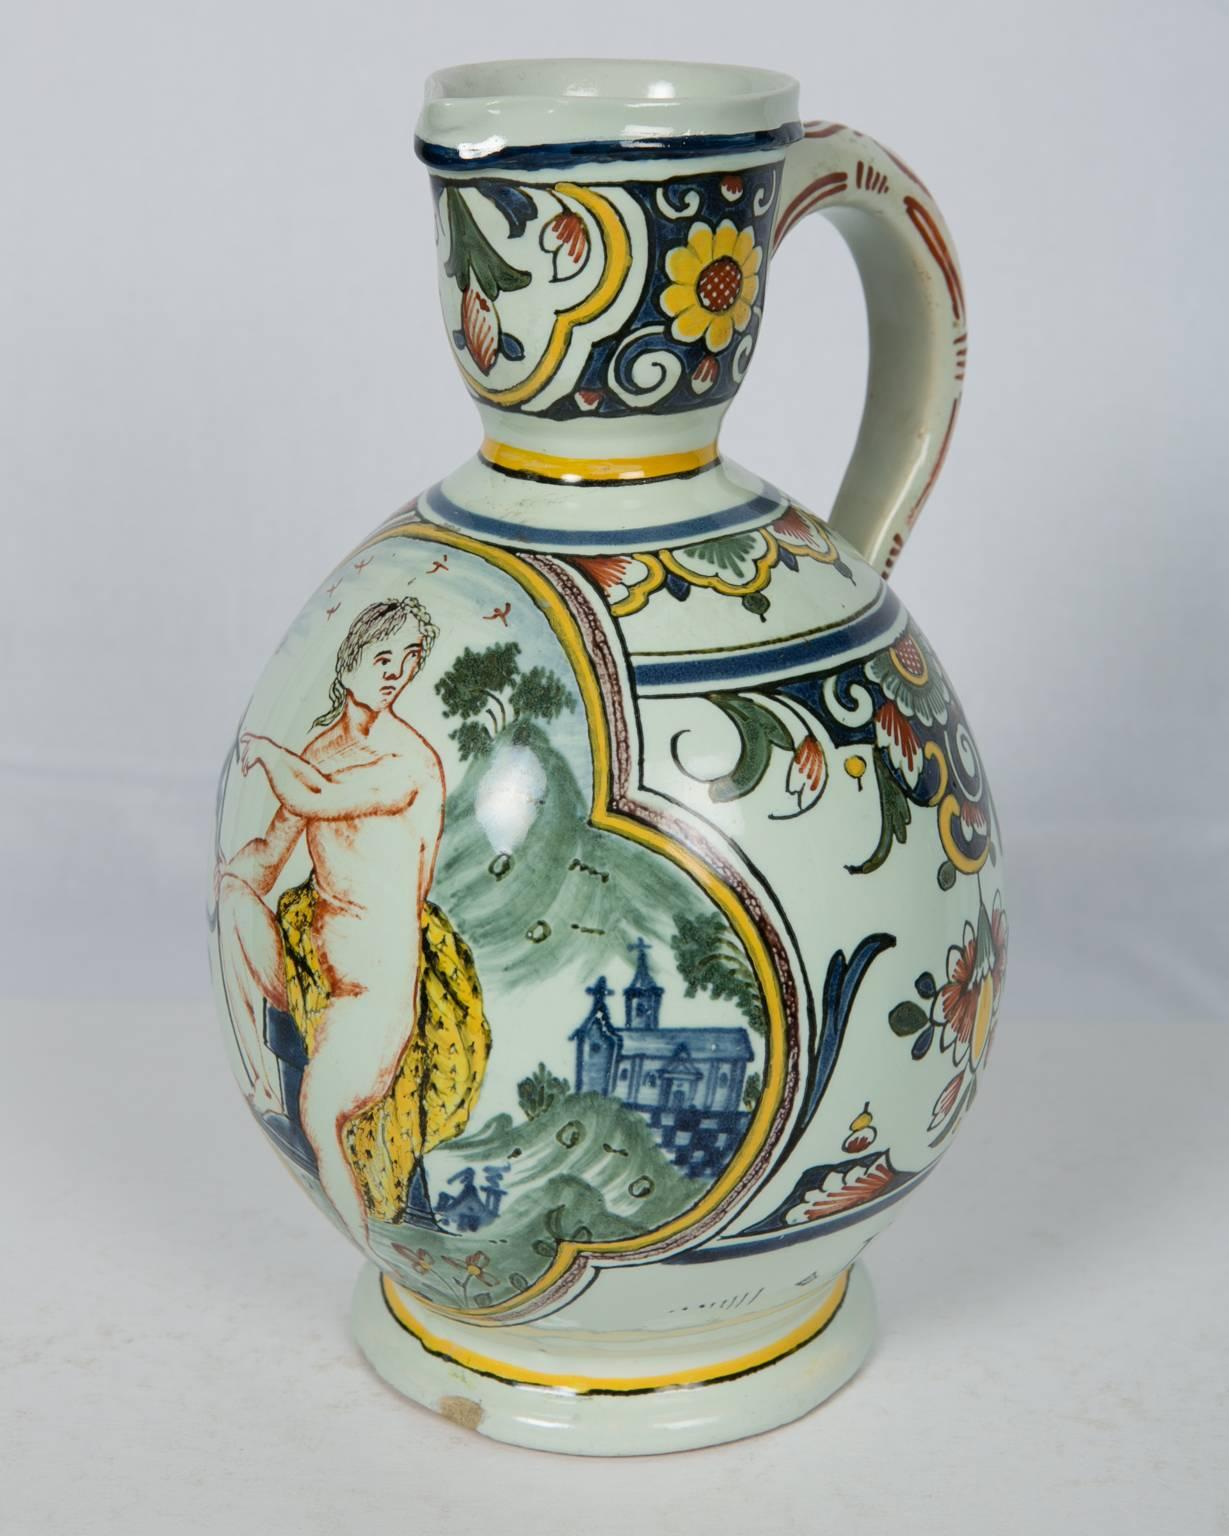 French Provincial John the Baptist Depicted on a French Faience Pitcher Made circa 1880